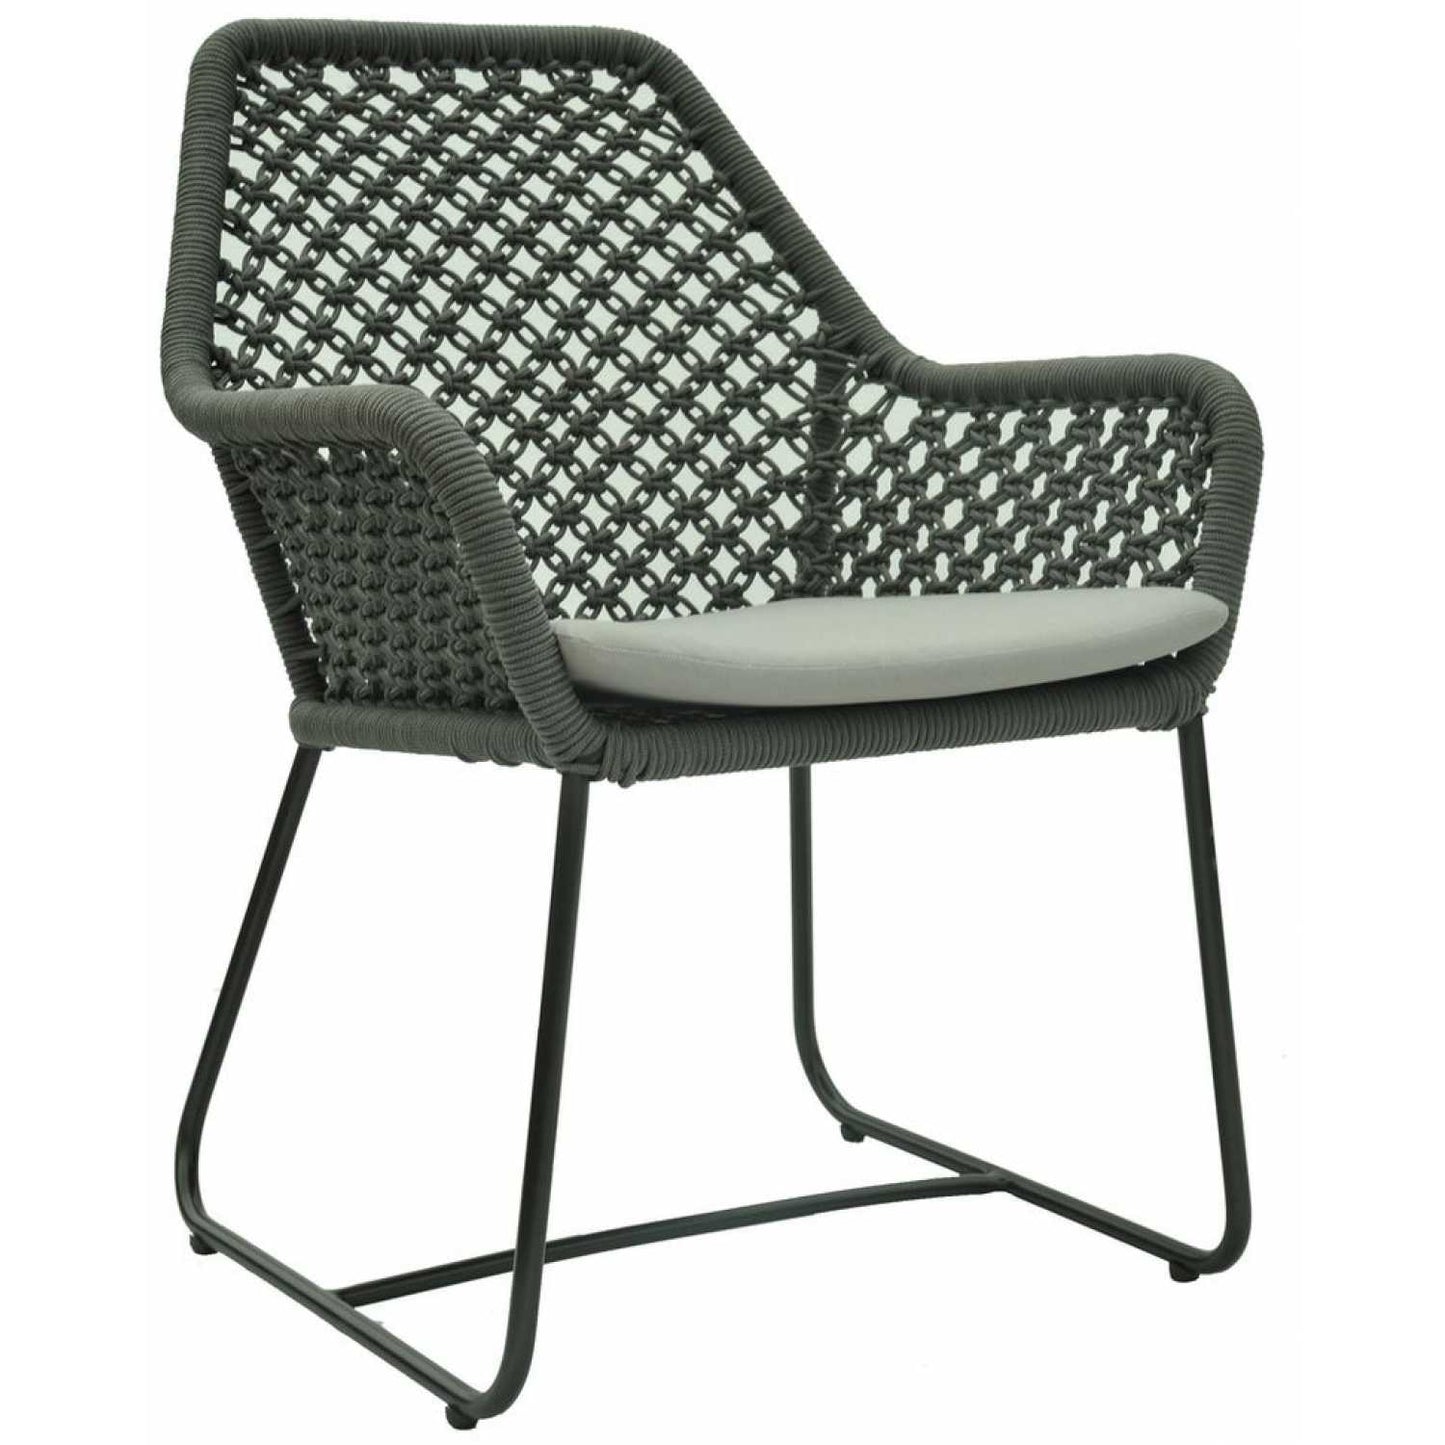 Kona Dining Chair - PadioLiving - Kona Dining Chair - Outdoor Dining Chair - Anthracite 6mm Poly Rope / Metal- Optik (£493) - PadioLiving